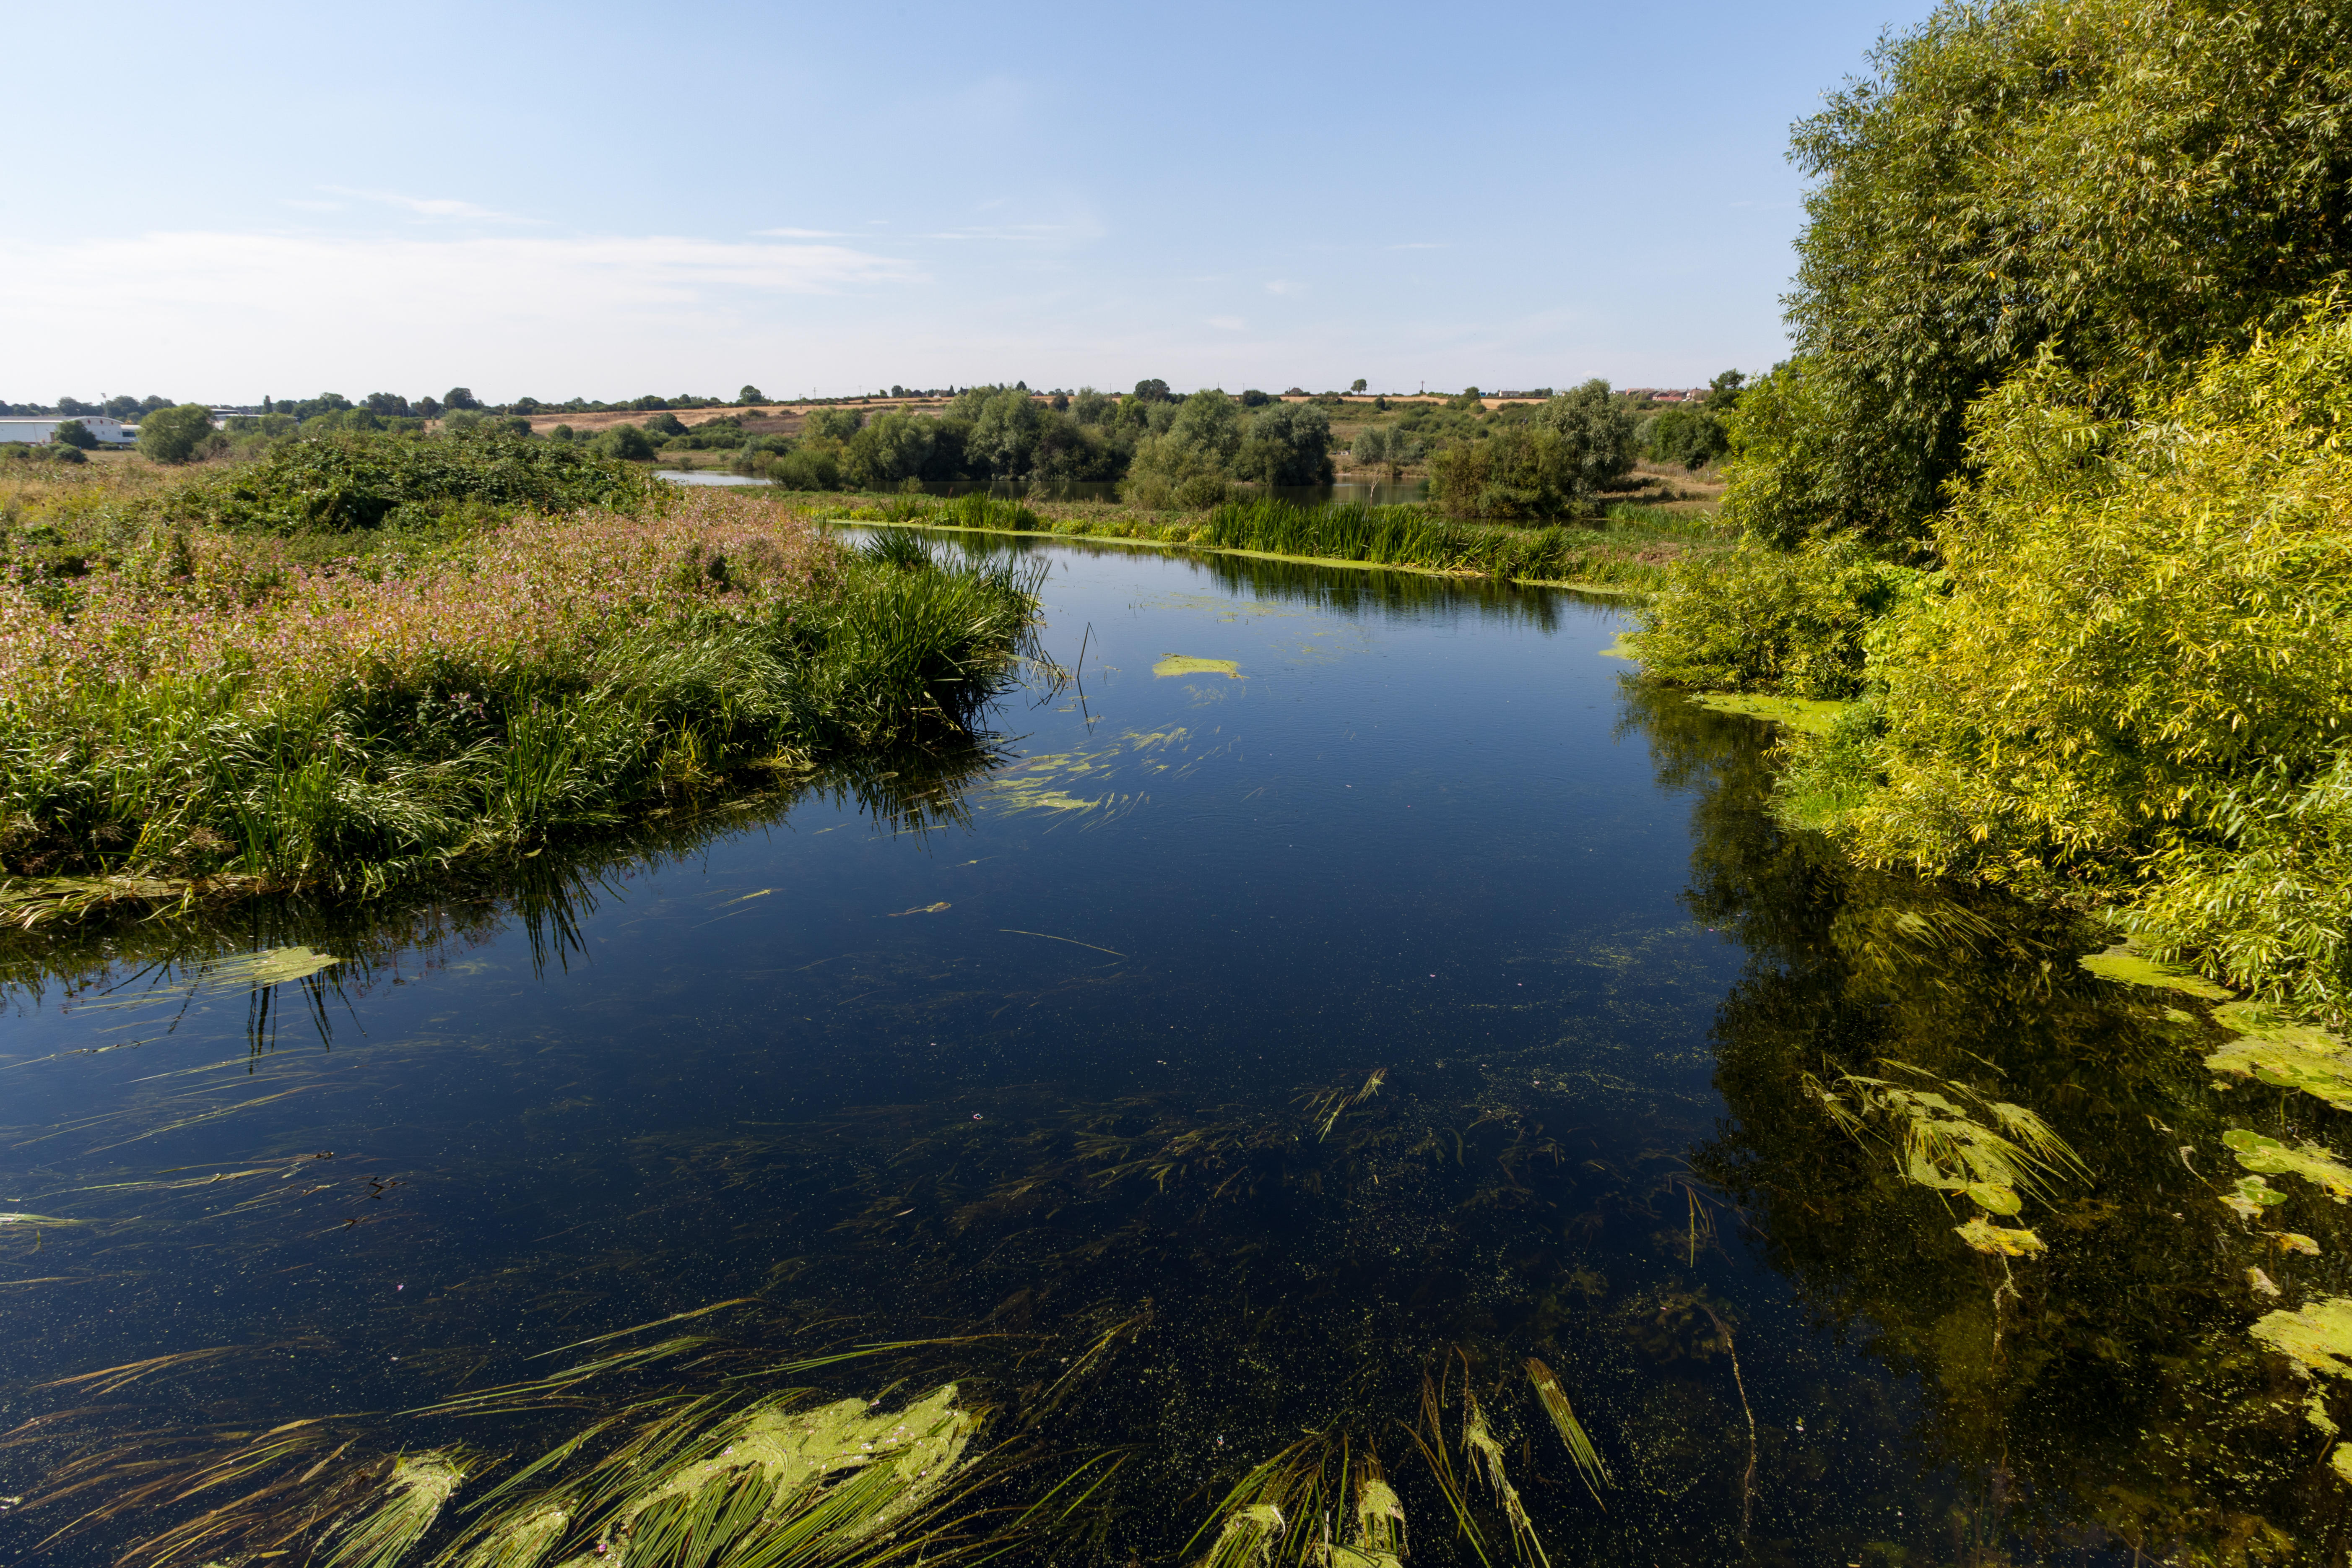 Stanwick Lakes has been praised on TripAdvisor, with a 4.5/5 star rating from nearly 1,000 reviews